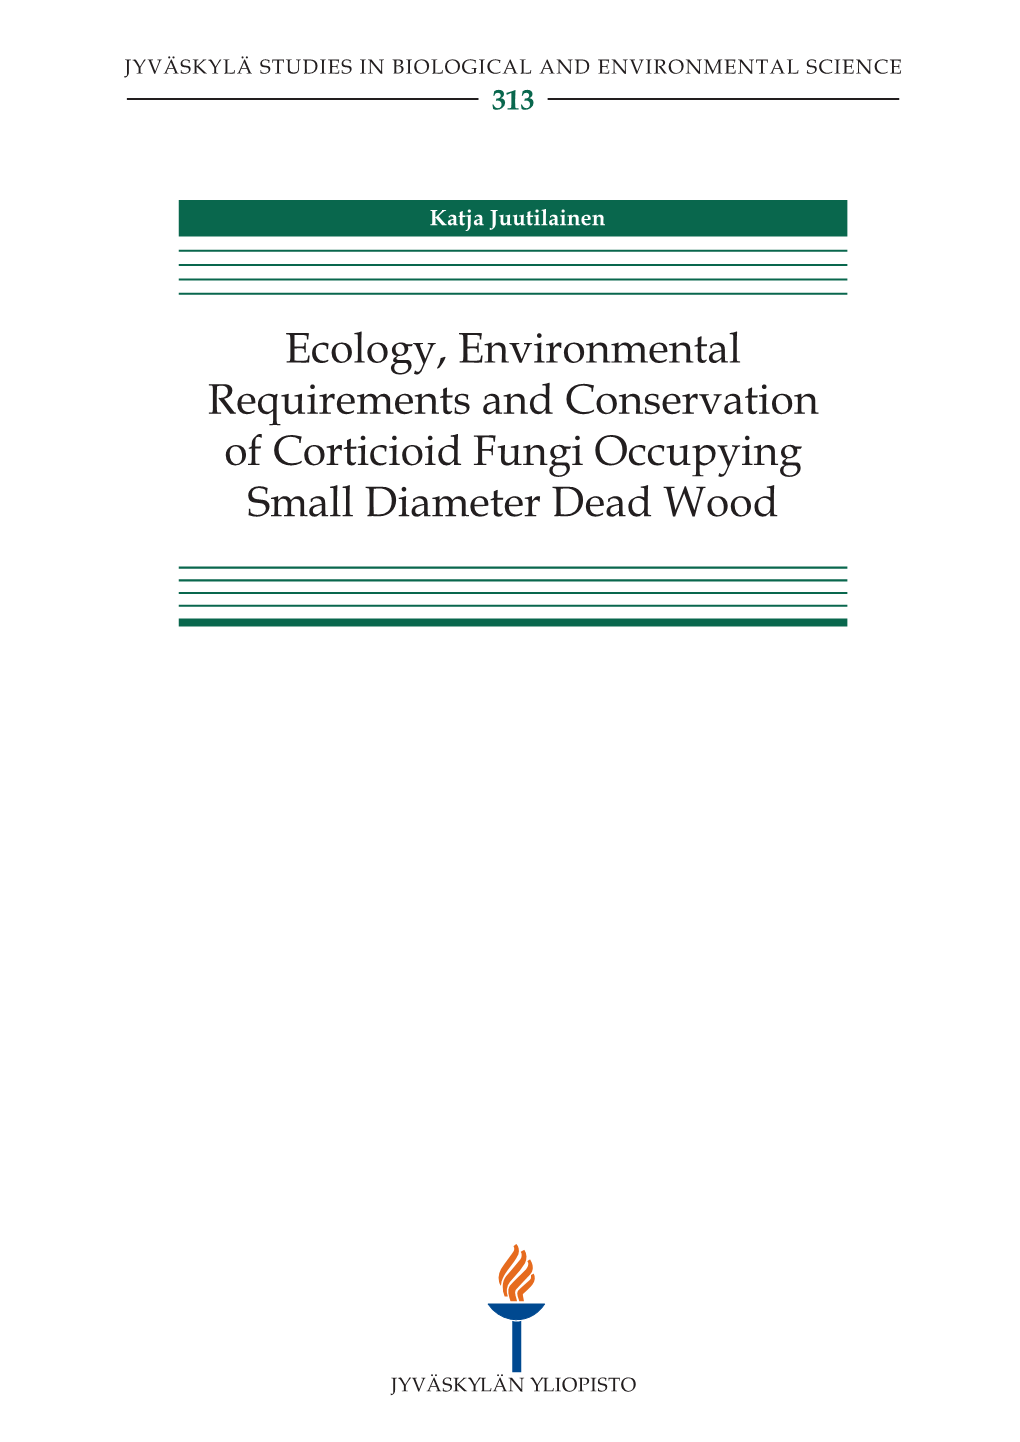 Ecology, Environmental Requirements and Conservation of Corticioid Fungi Occupying Small Diameter Dead Wood